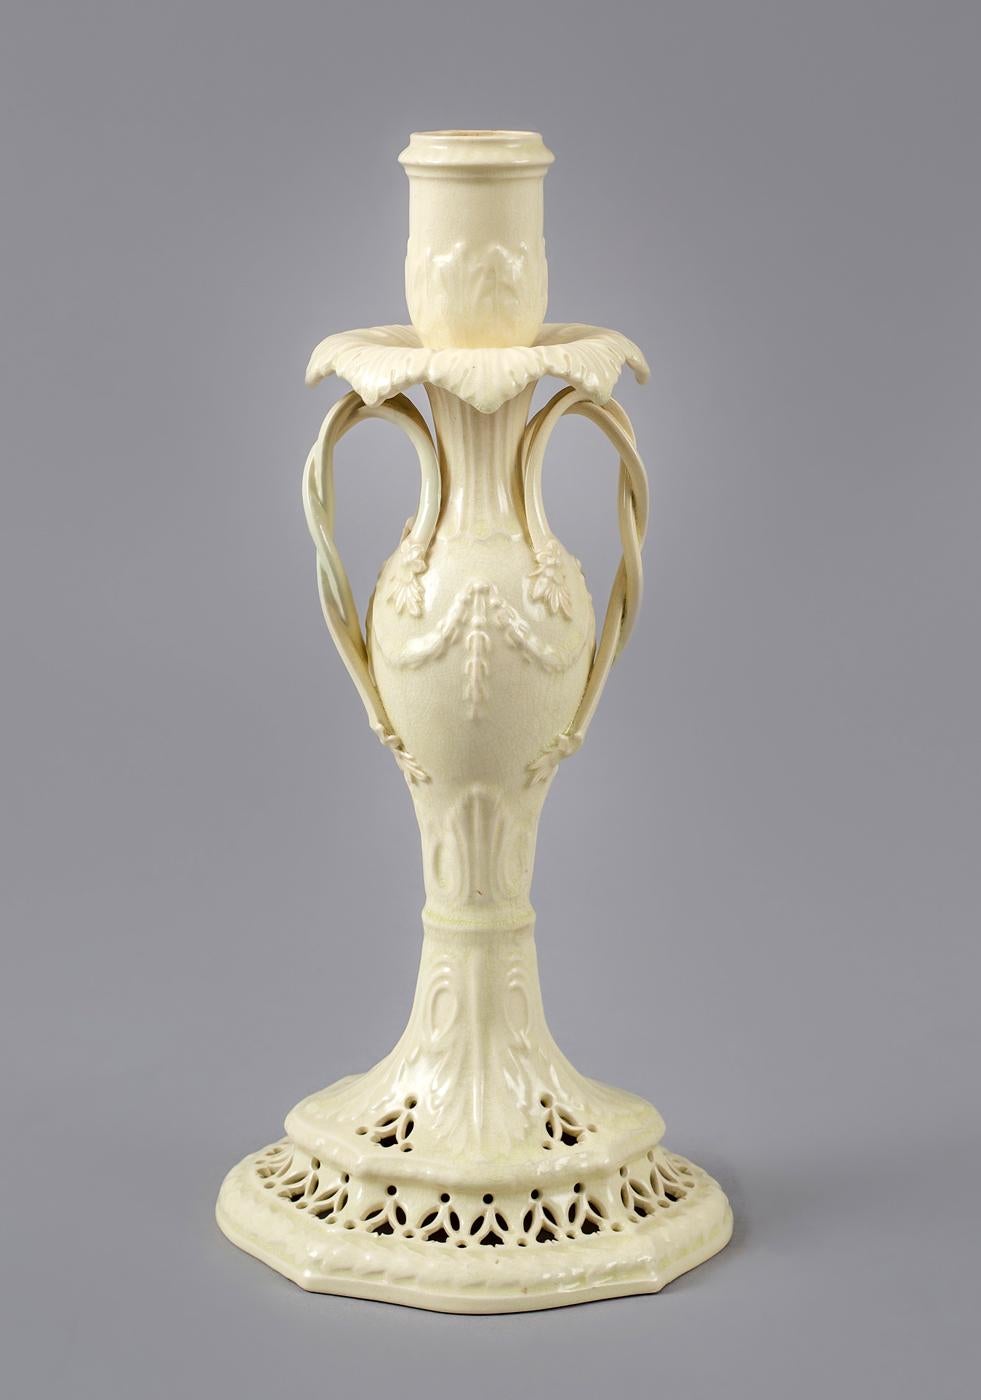 English 18th Century Creamware Candlestick with Twisted Handles For Sale